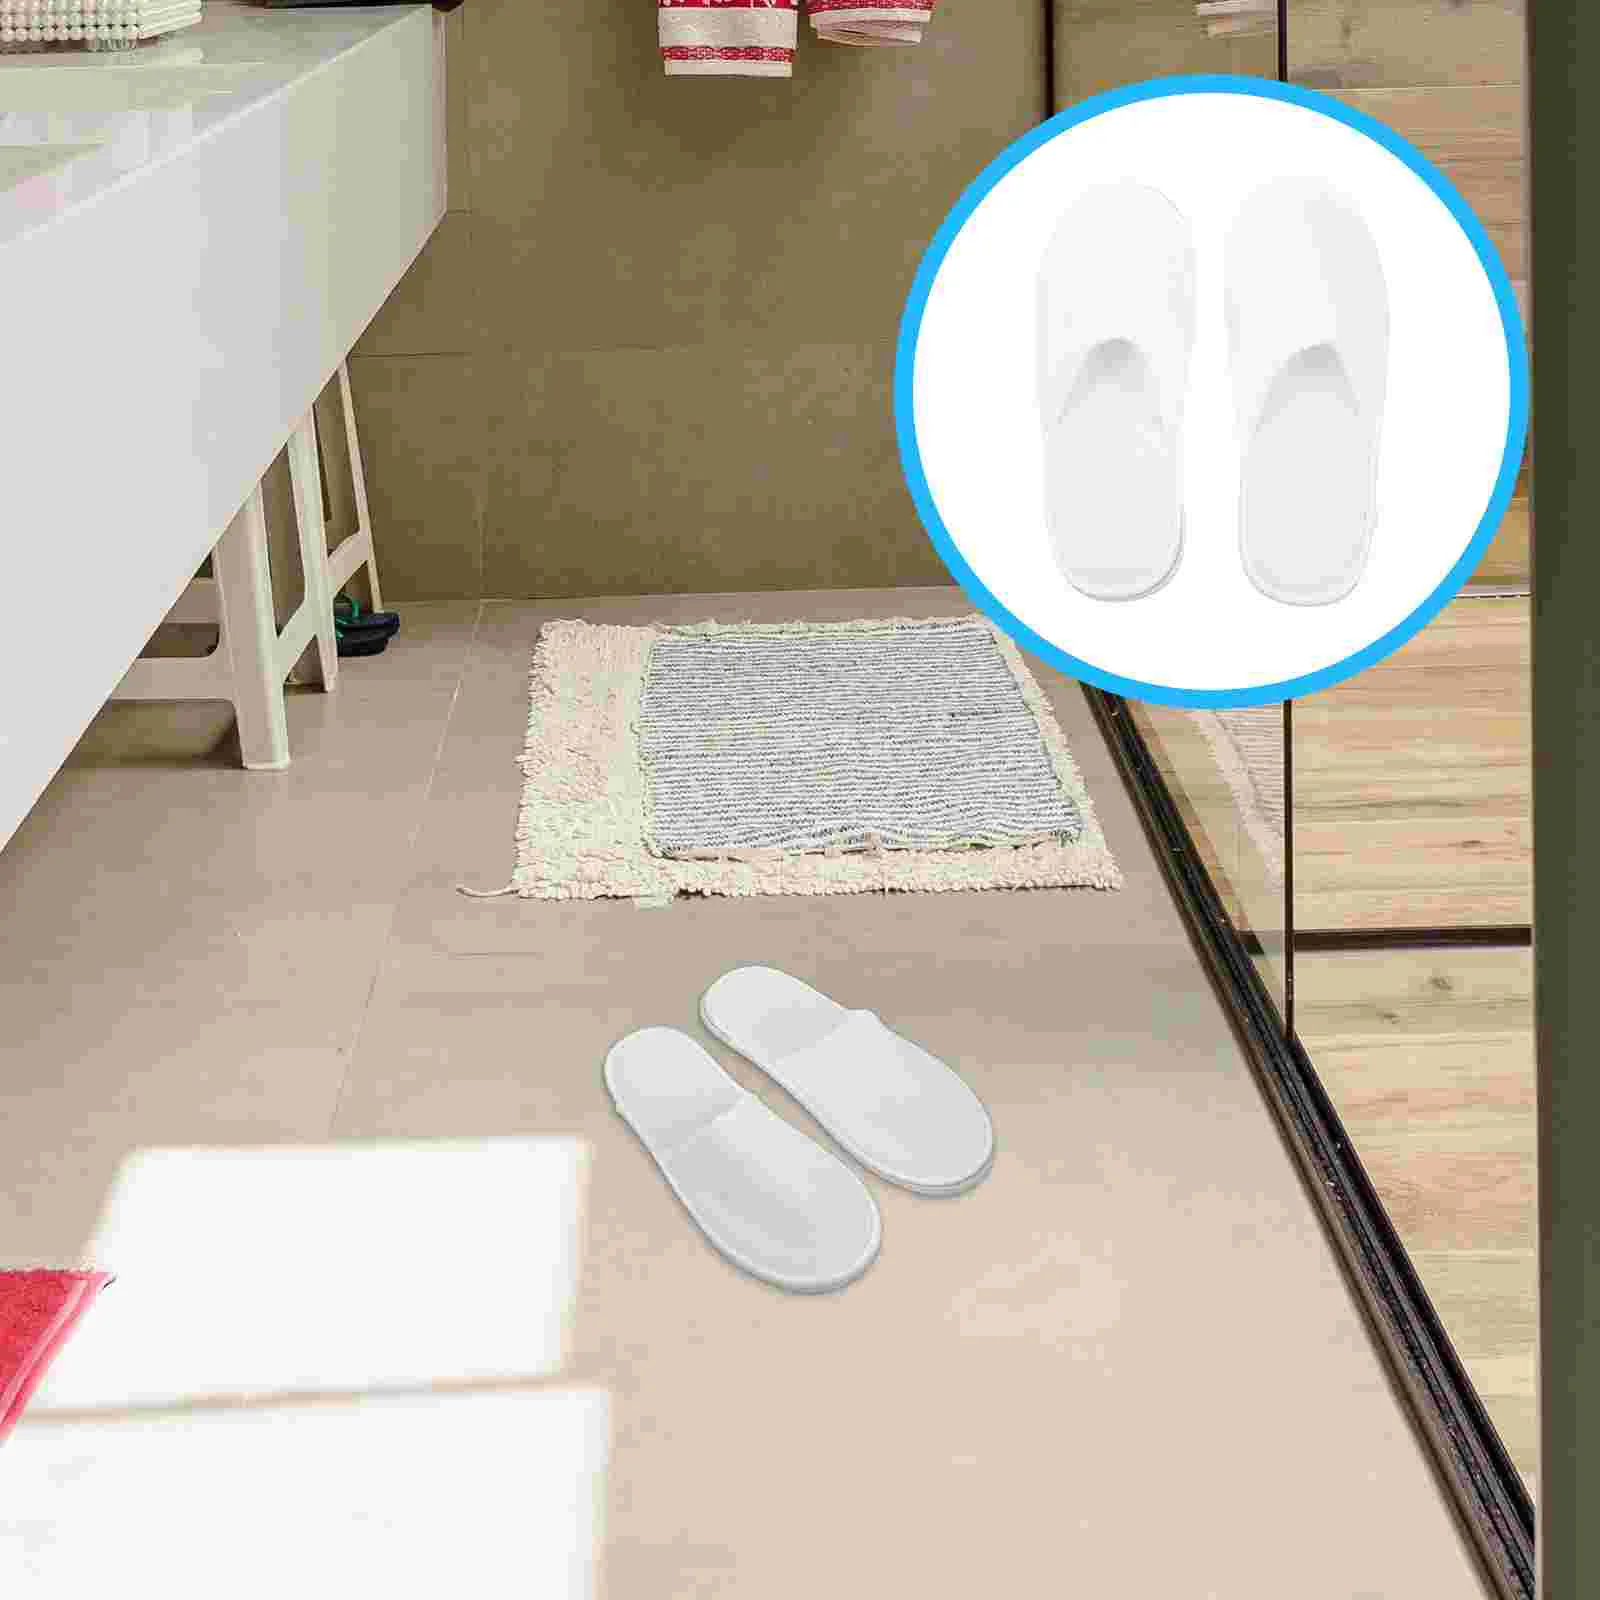 

Slippers Disposable Hotel Spa Guests Indoor Guest House Toe Bulk Slipper Supple Off Coral Home Fleece Shoes Bathroom Closed